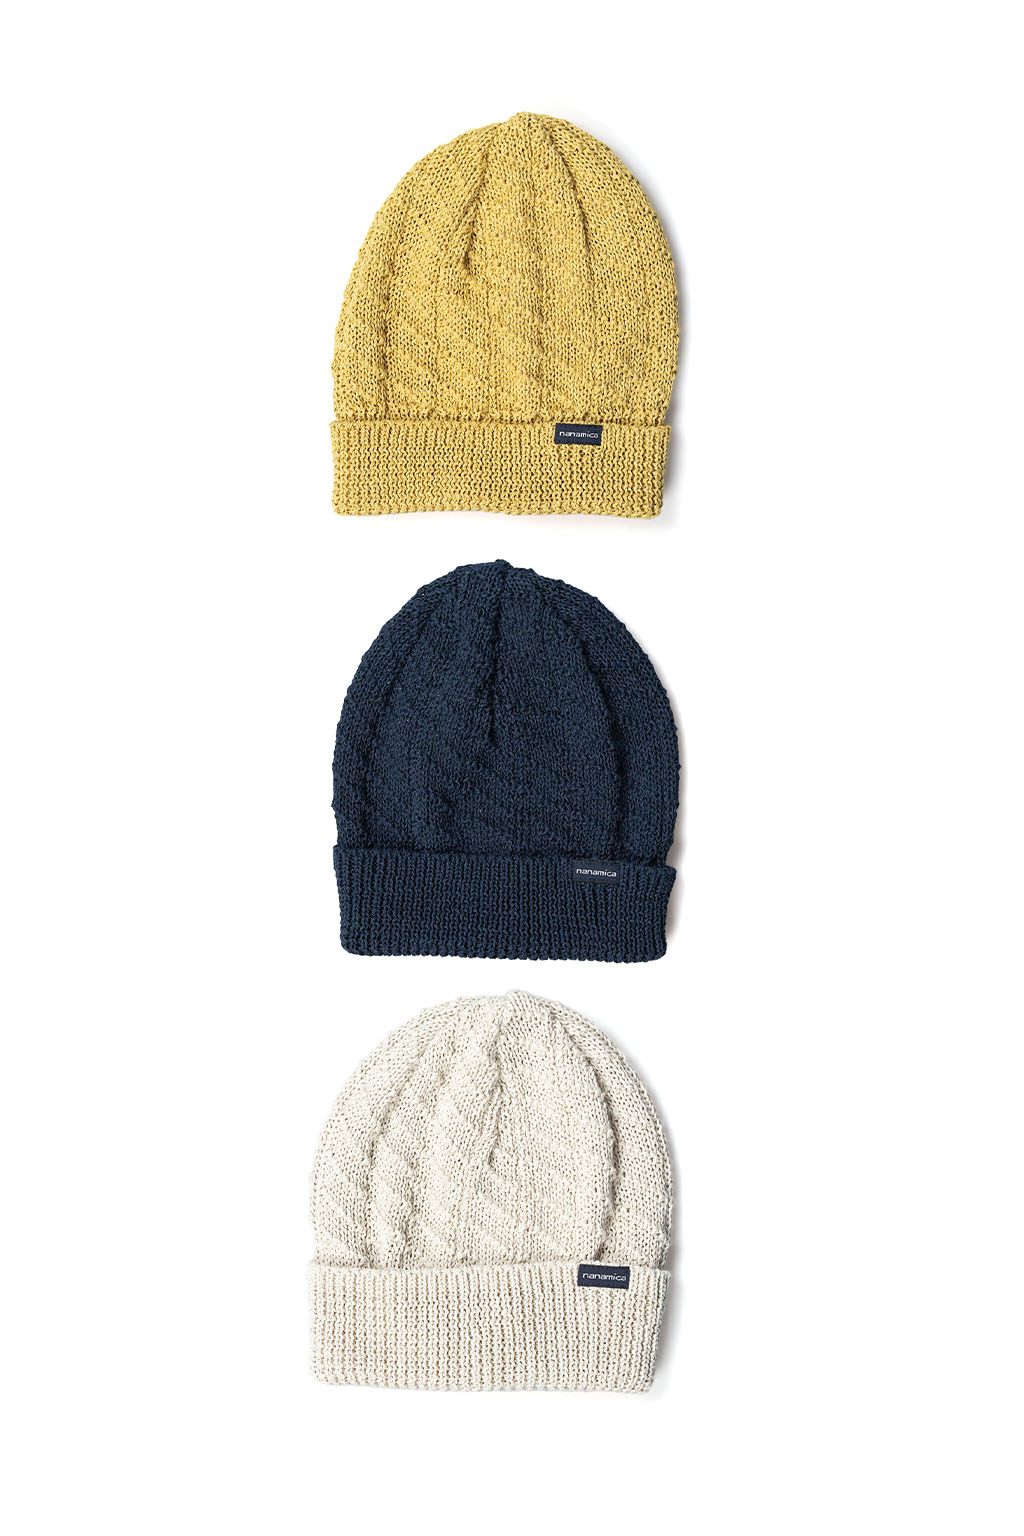 Nanamica (NAN) - Wind Watch Cap in 3 Color Choices